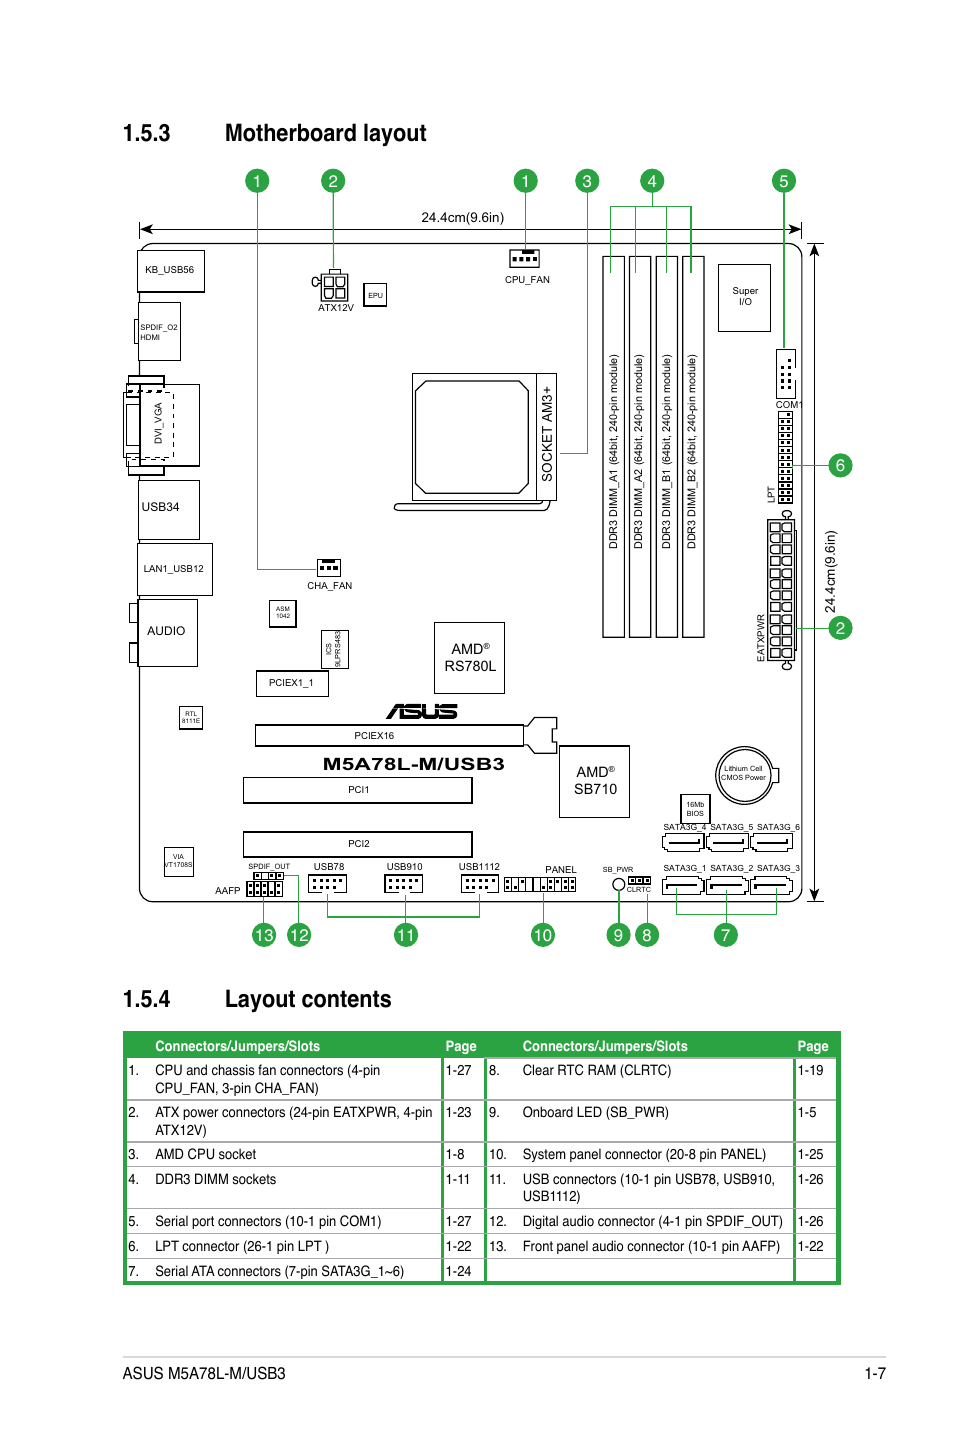 3 motherboard layout, 4 layout contents, Motherboard layout -7 | Asus M5A78L -M/USB3 User Manual | Page 17 / 64